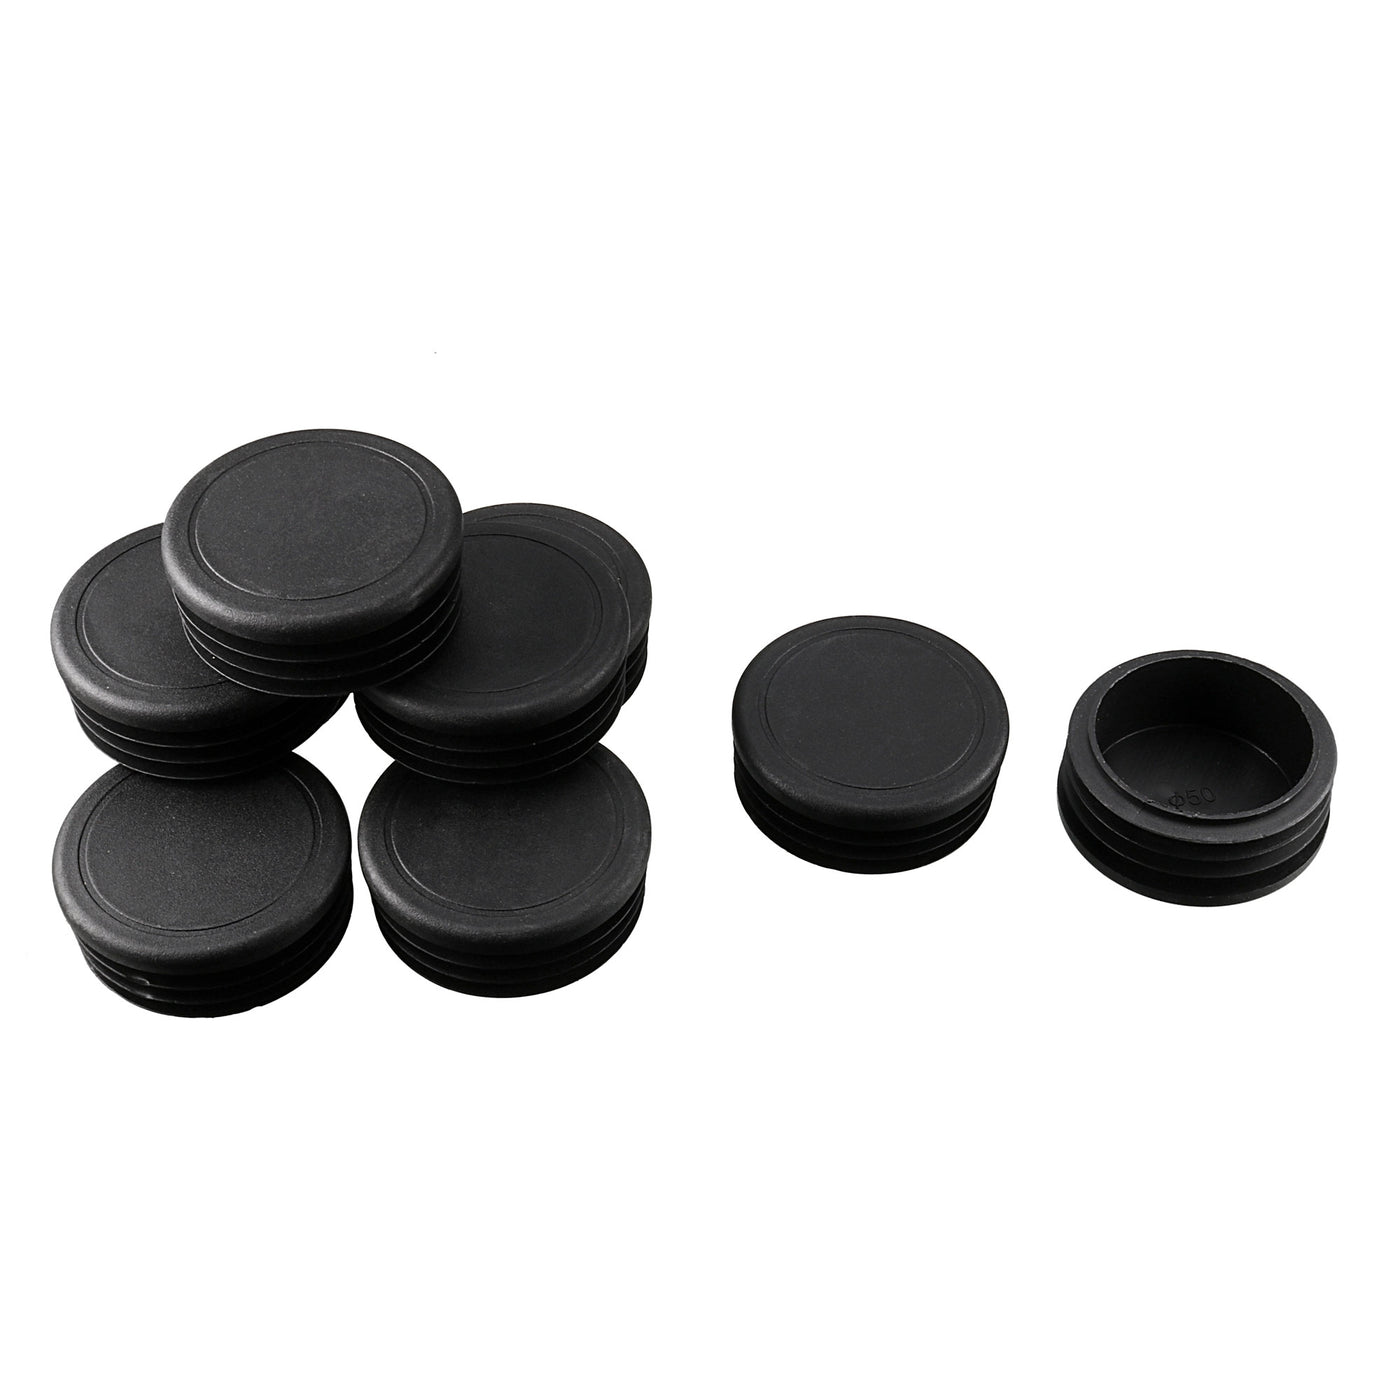 Uxcell Uxcell 50mm 2" OD Plastic Tube Inserts Pipe End Blank Caps 9pcs, 1.85"-1.93" Inner Dia, for Steel Legs Bung